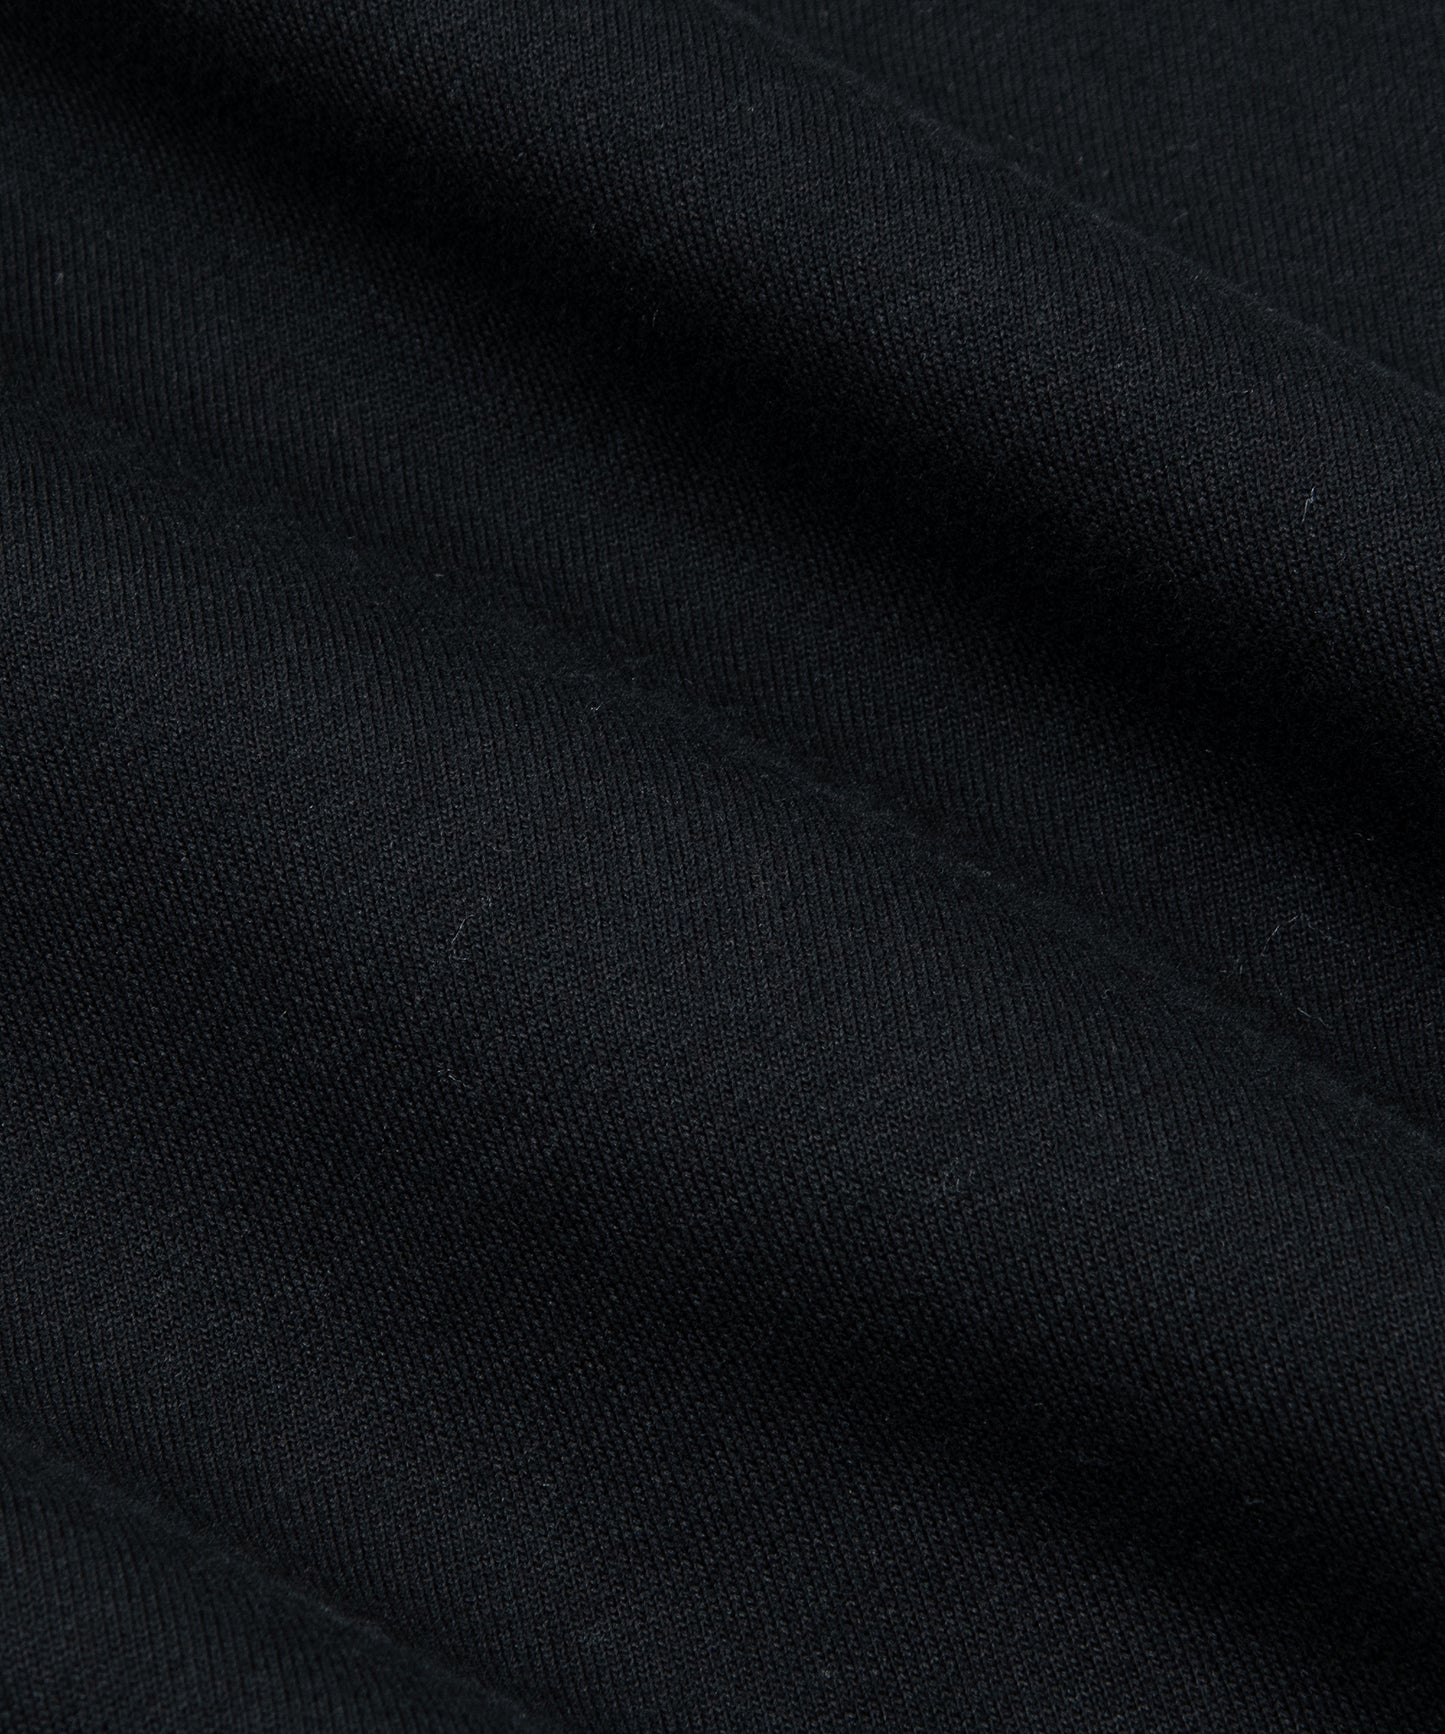 CUSTOM_ALT_TEXT: Closeup of French terry fabric on Paper Planes Mantra Hoodie, color Black.